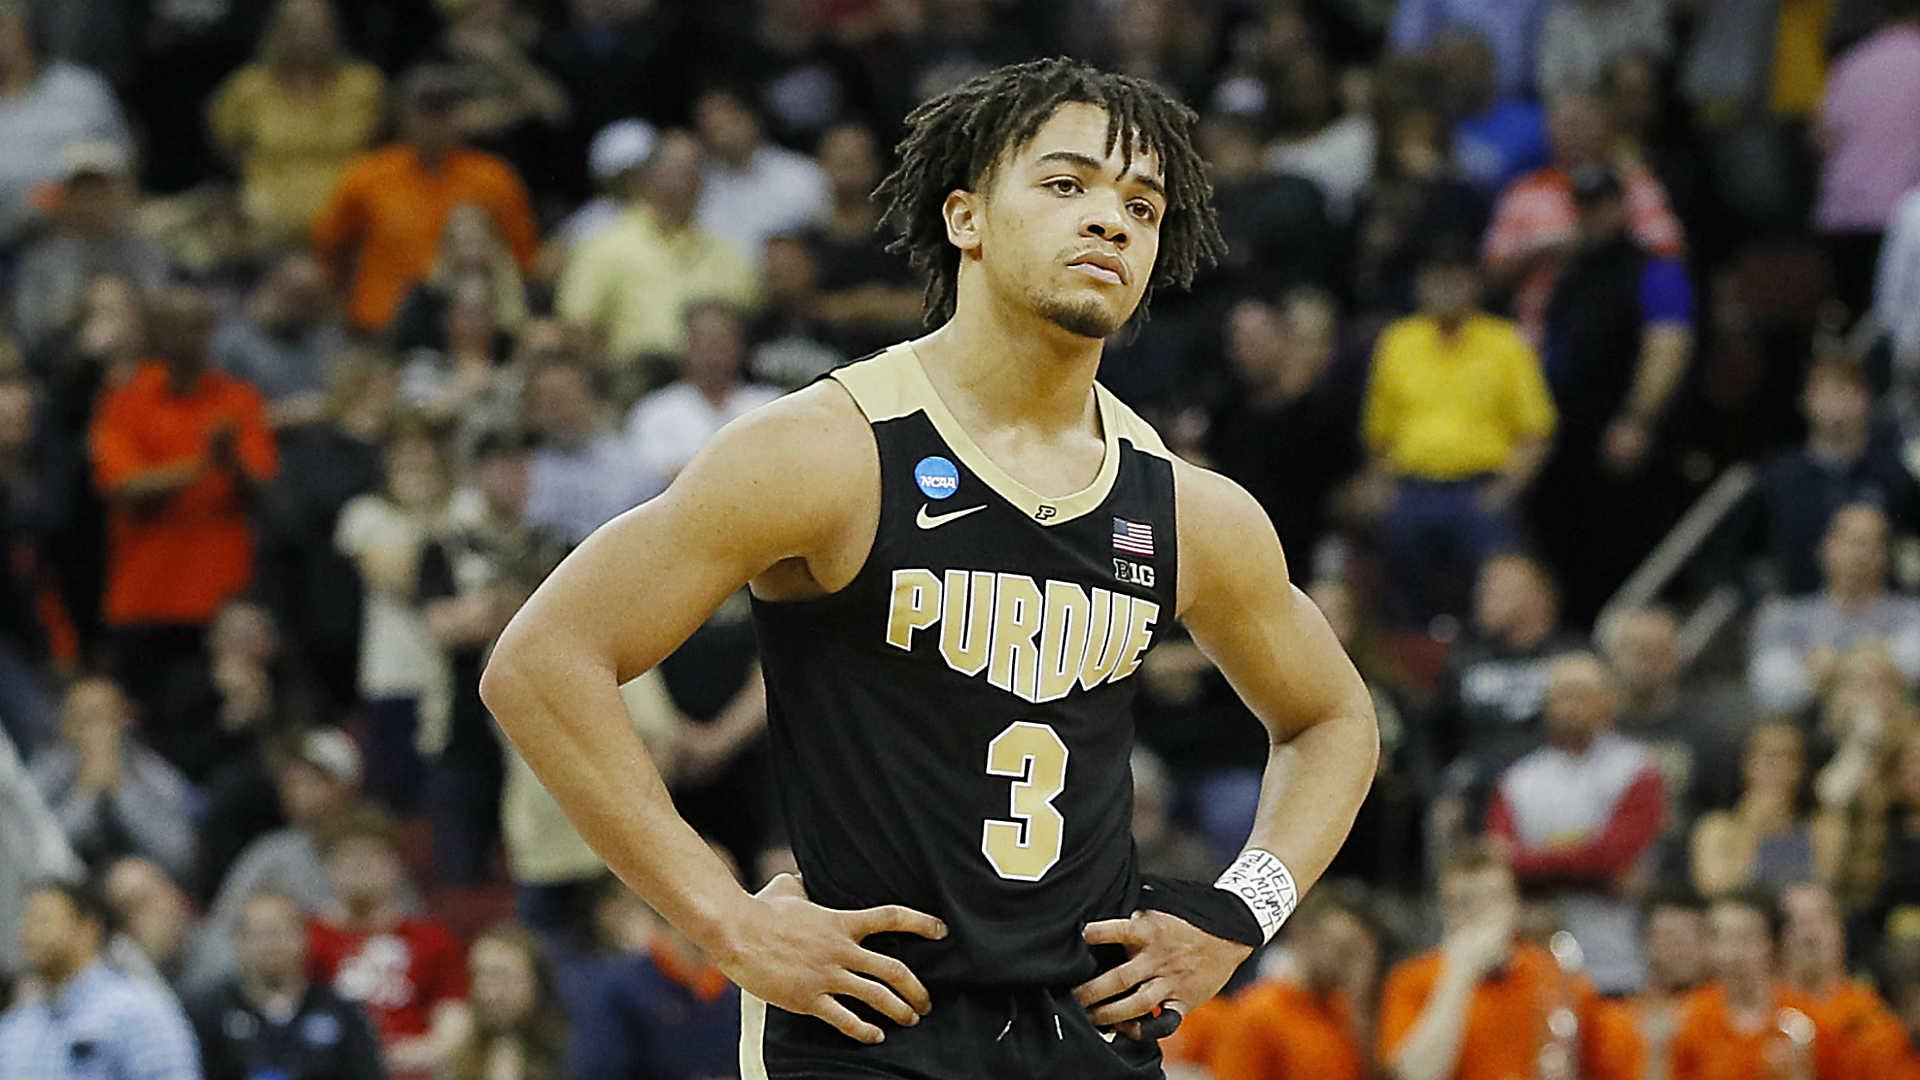 March Madness 2019: Hard to call Carsen Edwards' masterpiece a